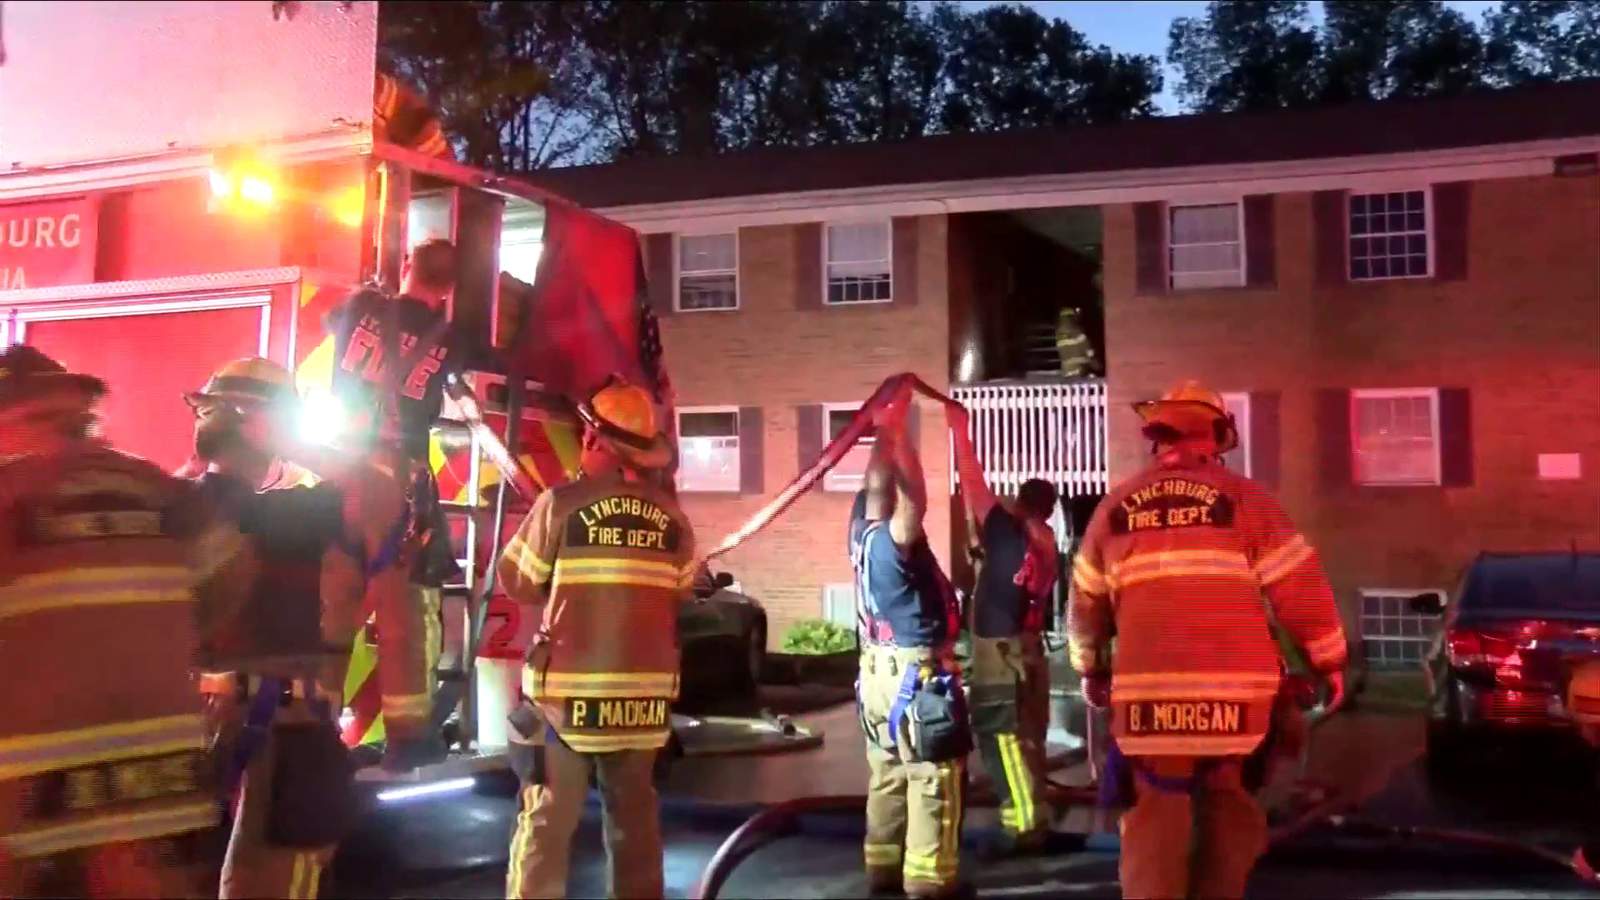 Lynchburg Fire Department works to comfort community after deadly house fire